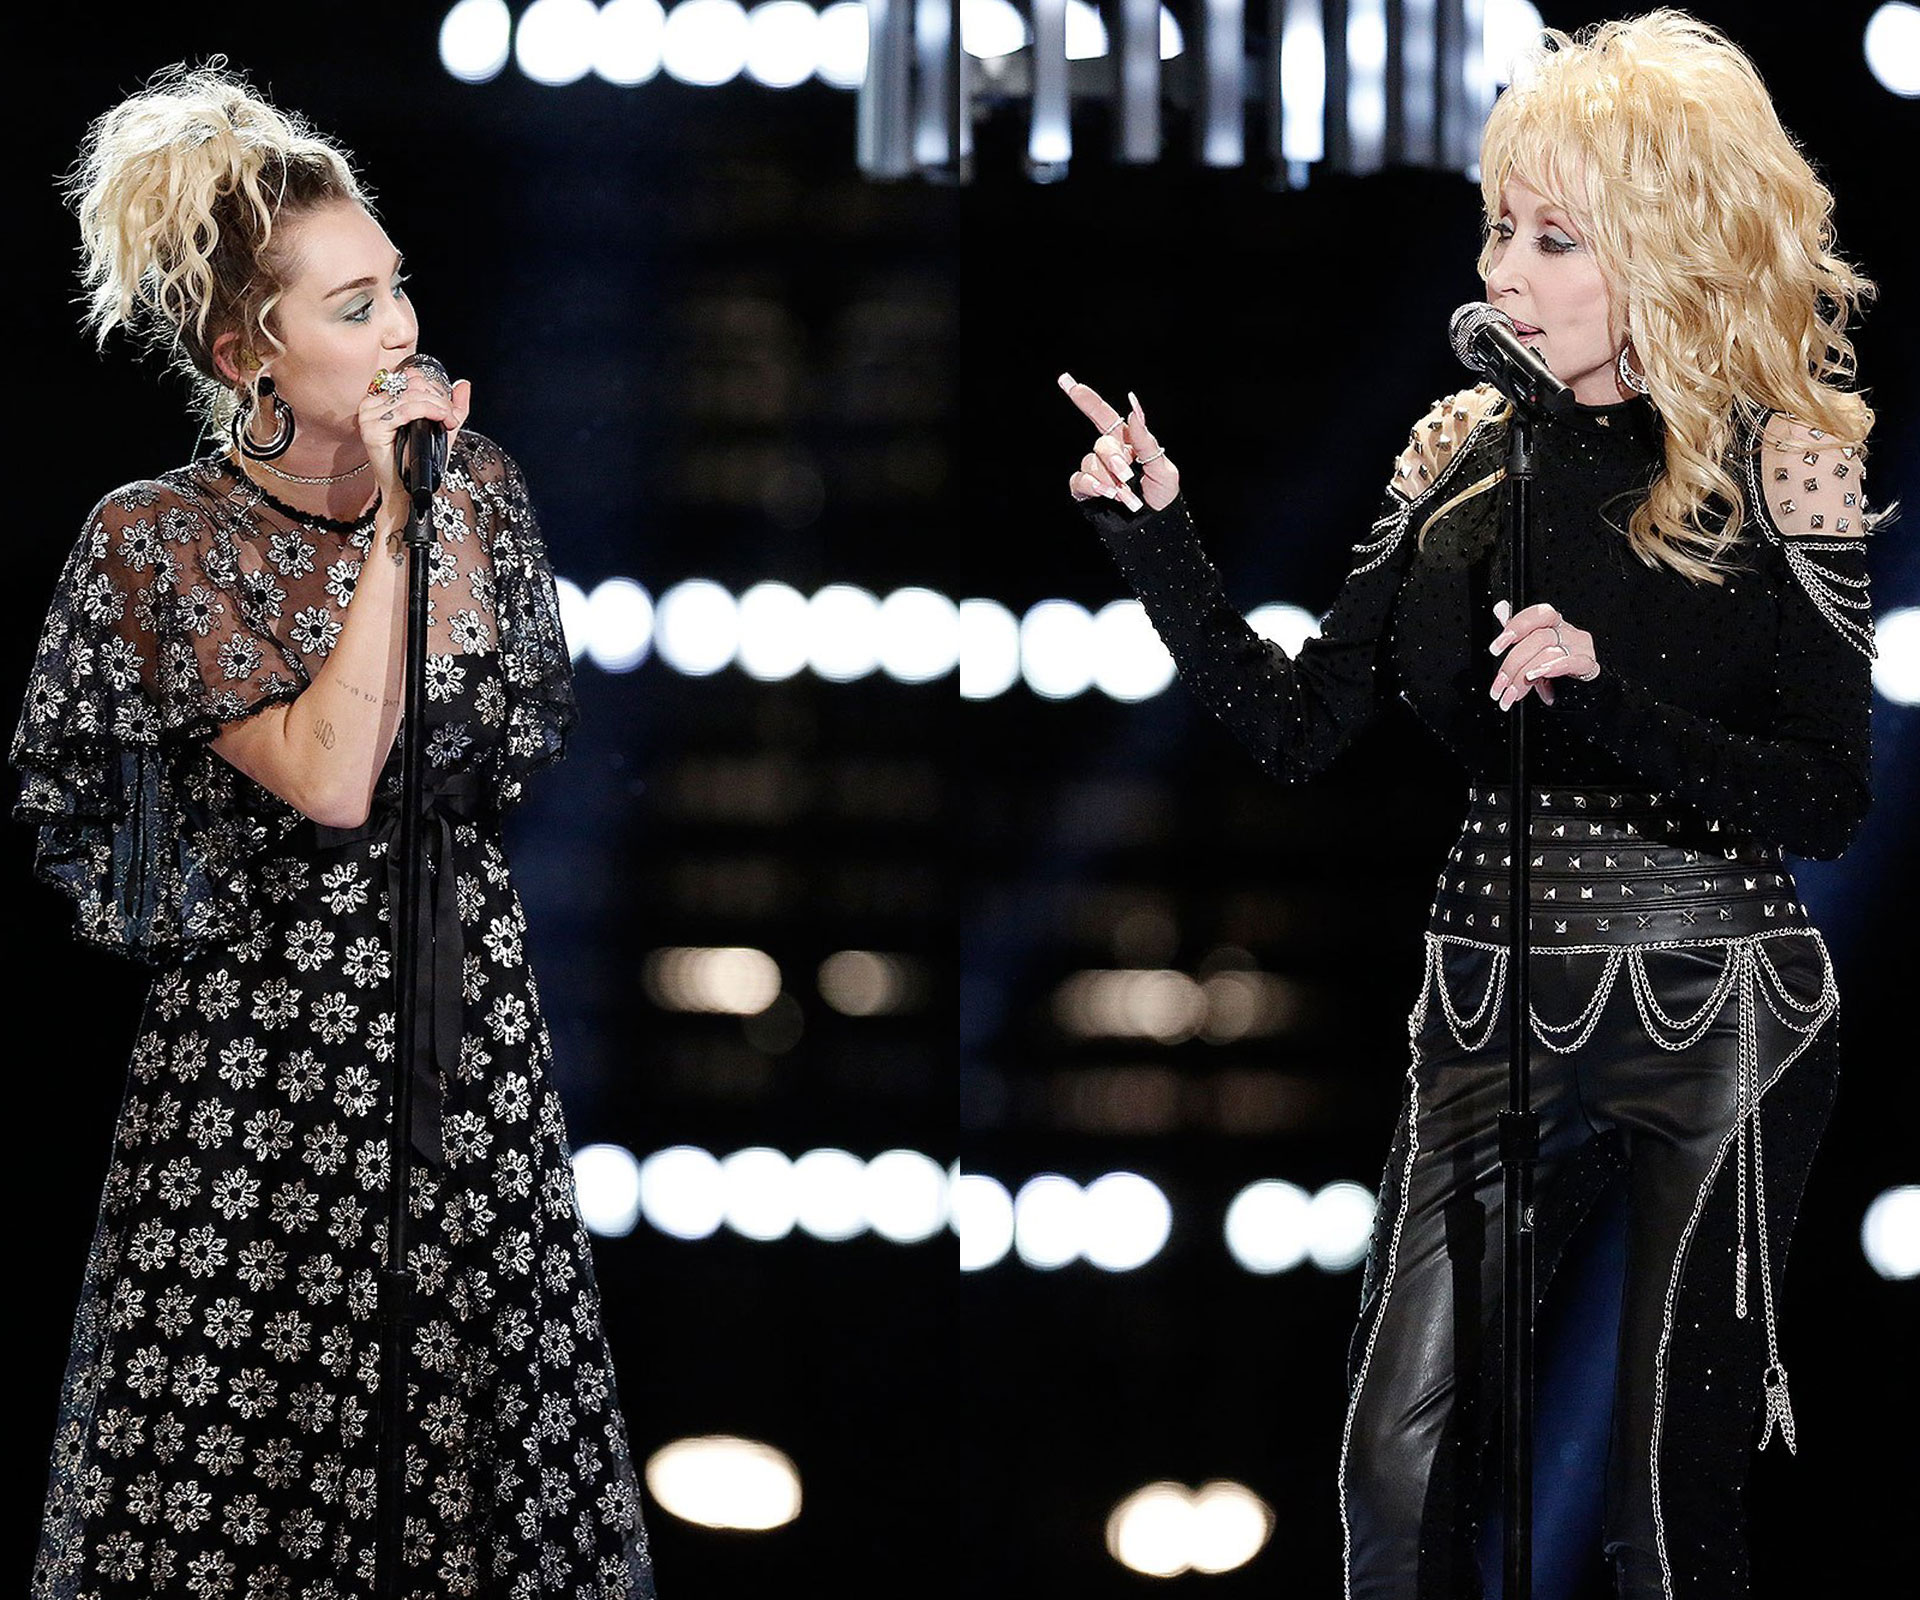 Watch Dolly Parton duet with goddaughter Miley Cyrus on The Voice